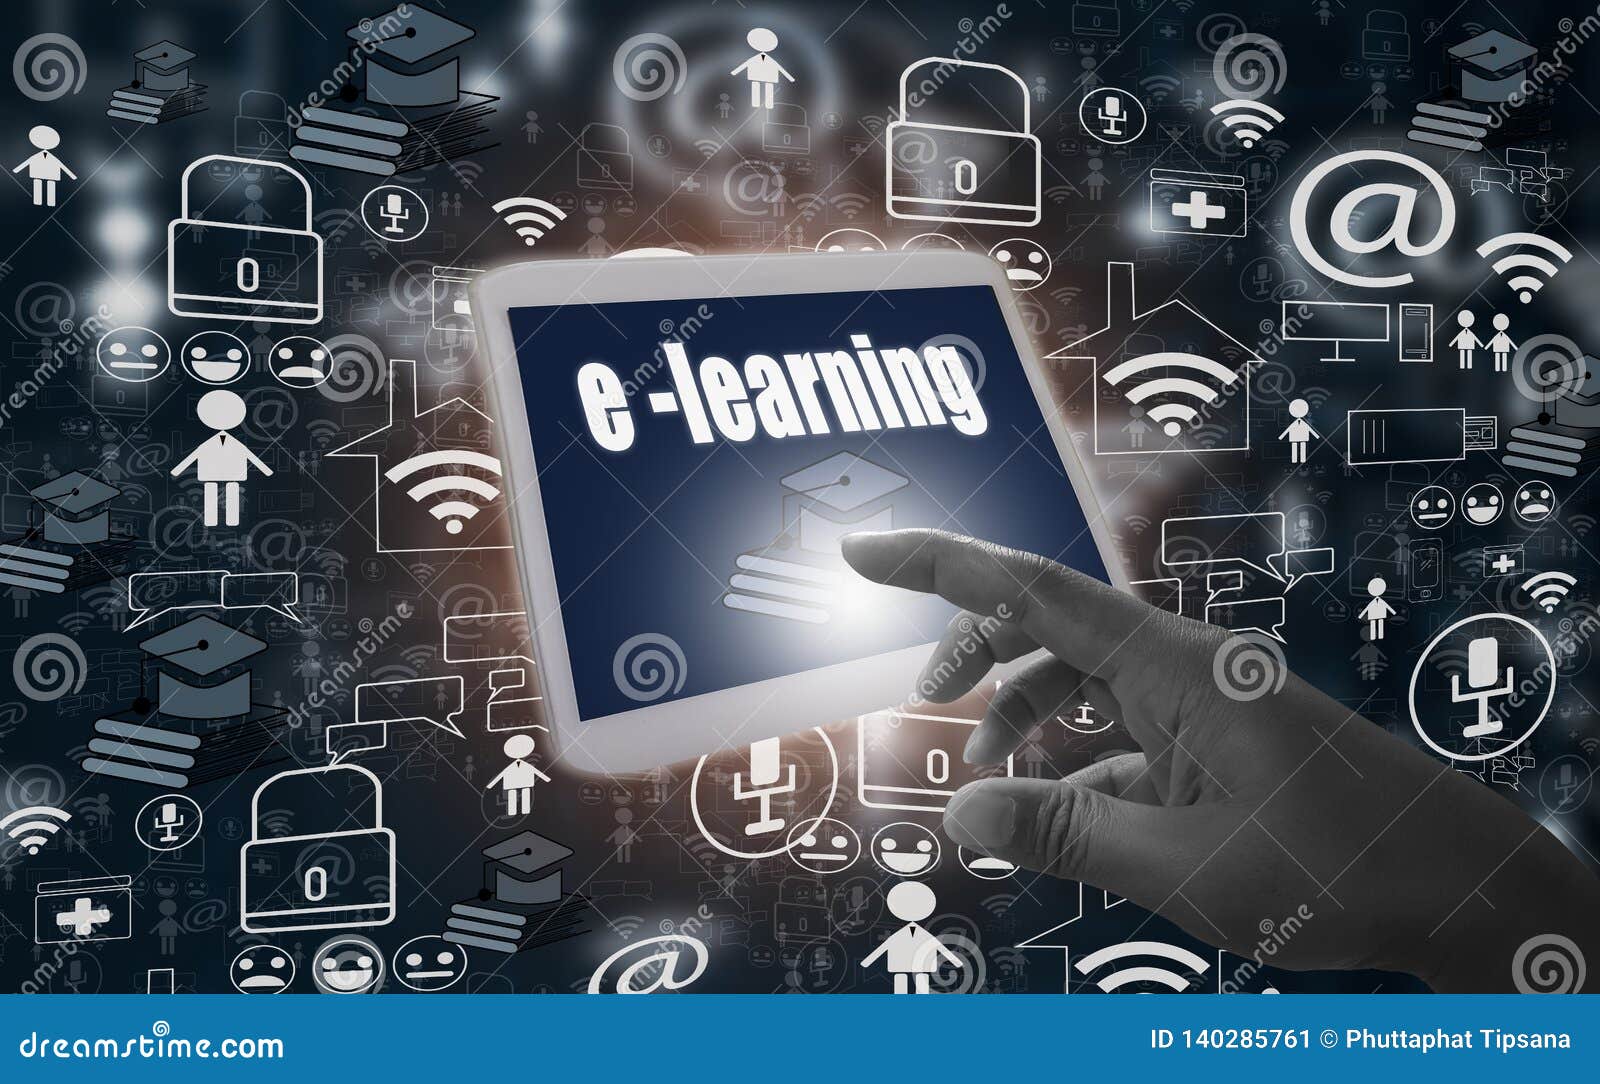 E-learning and Online Education, with Finger Touch Tablet Screen and Icons Social Media on Black Background, Creative Design Stock Illustration - Illustration of information, icon: 140285761